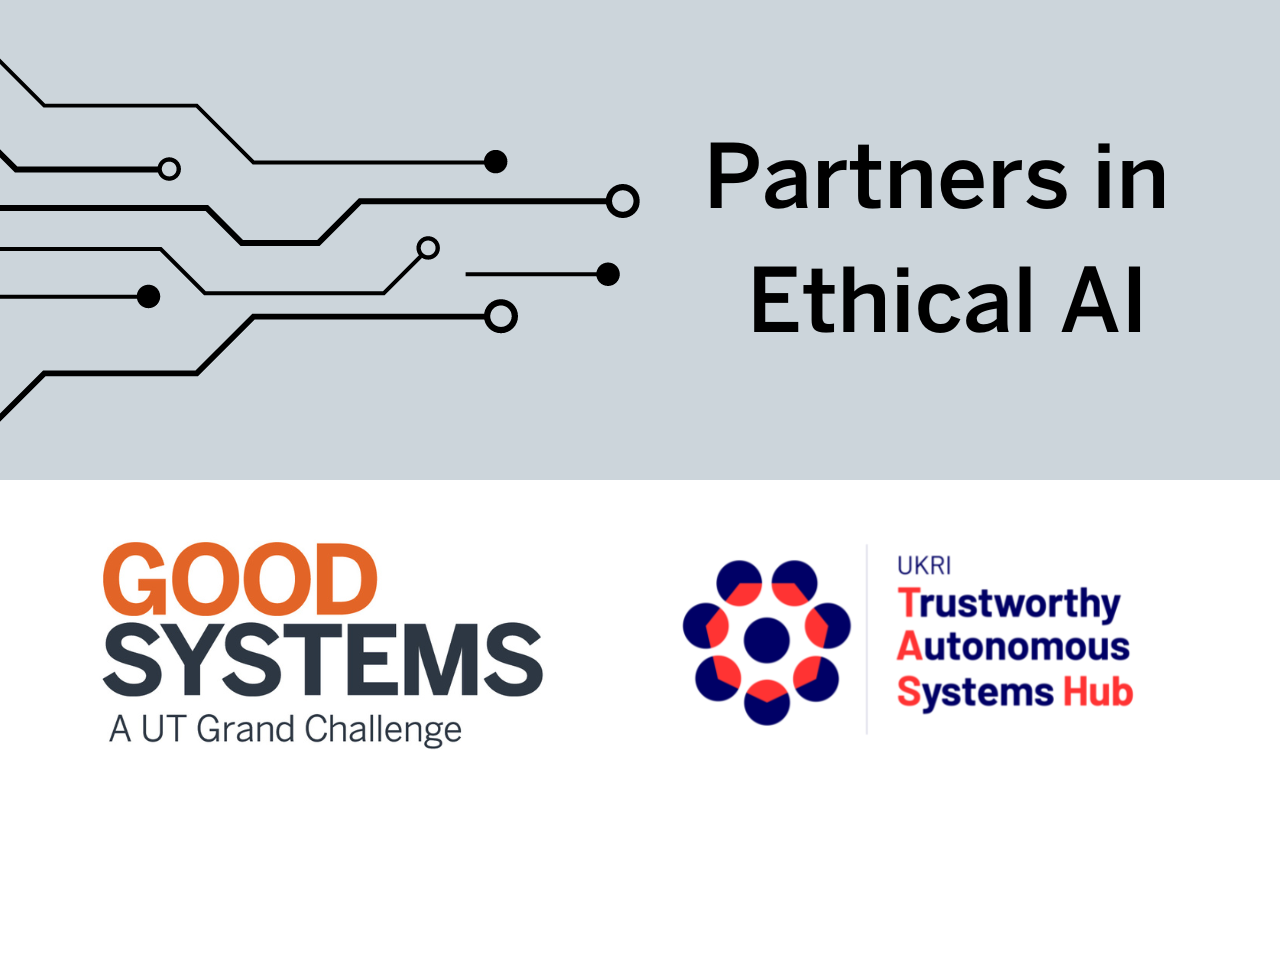 Partners in Ethical AI